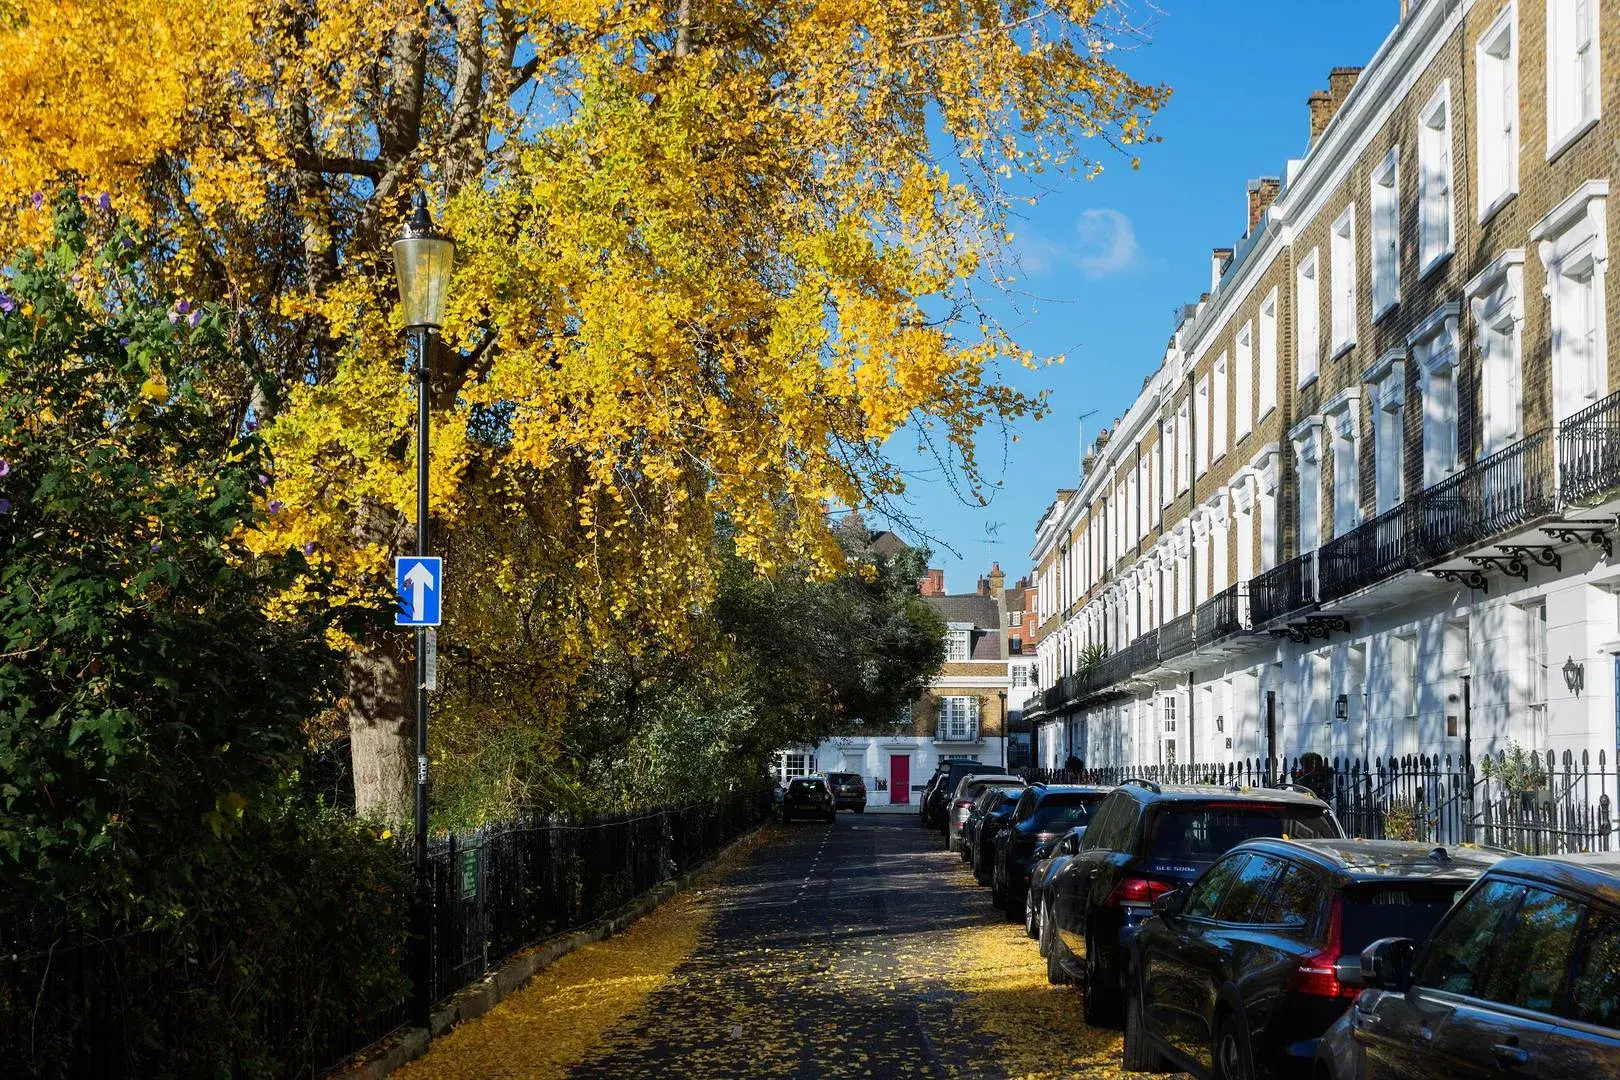 Markham Square, holiday home in Chelsea, London